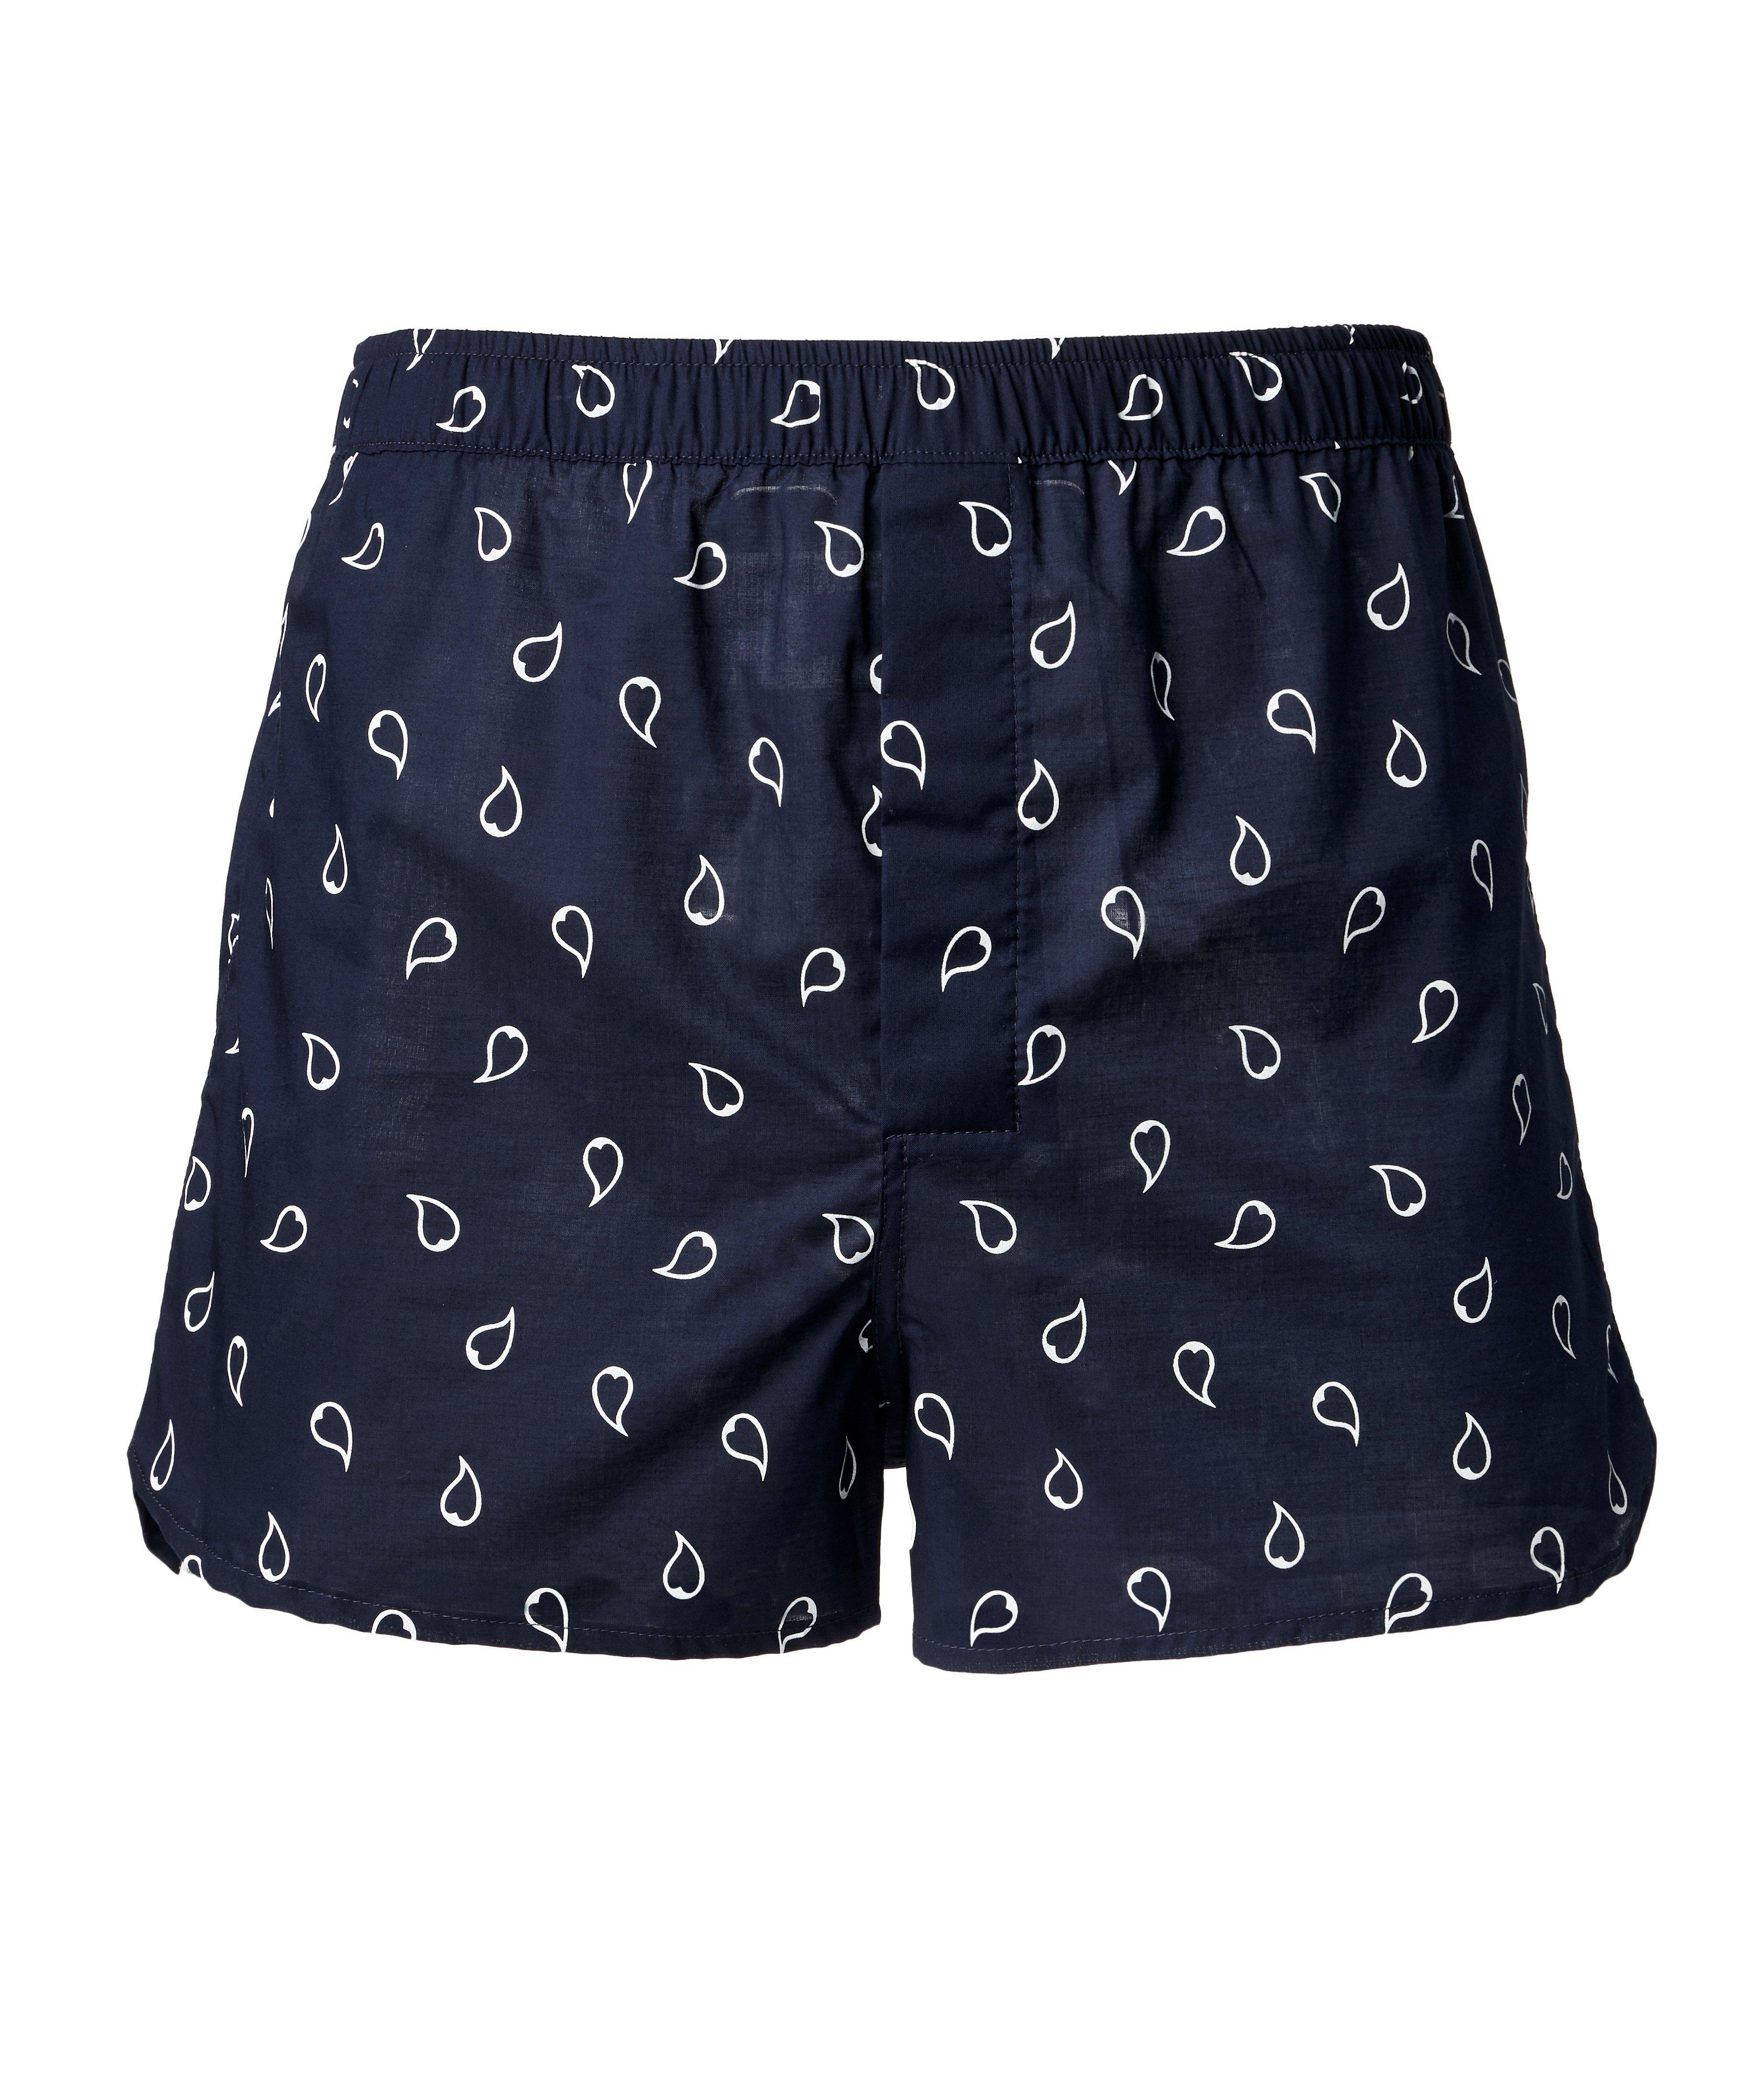 Printed Cotton Boxers image 0